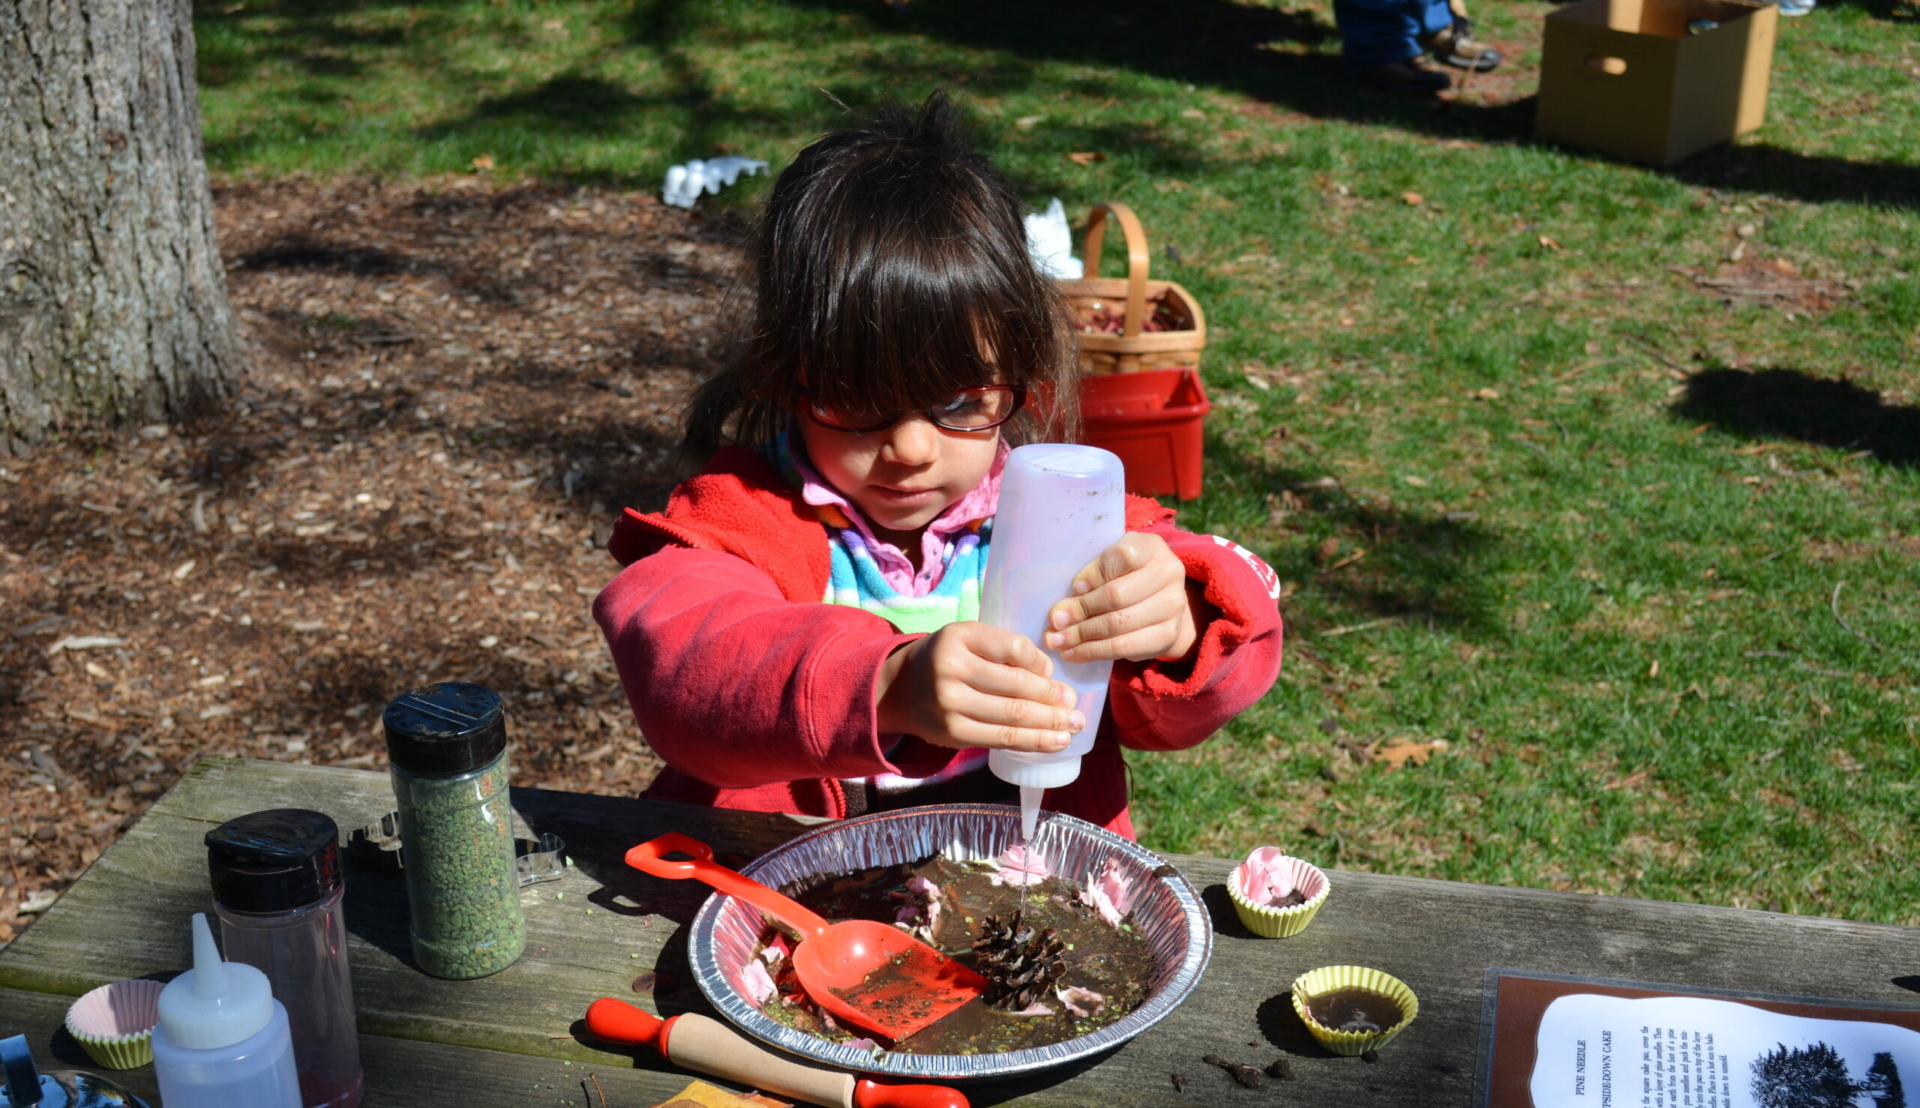 A child making a mud pie on a picnic table.